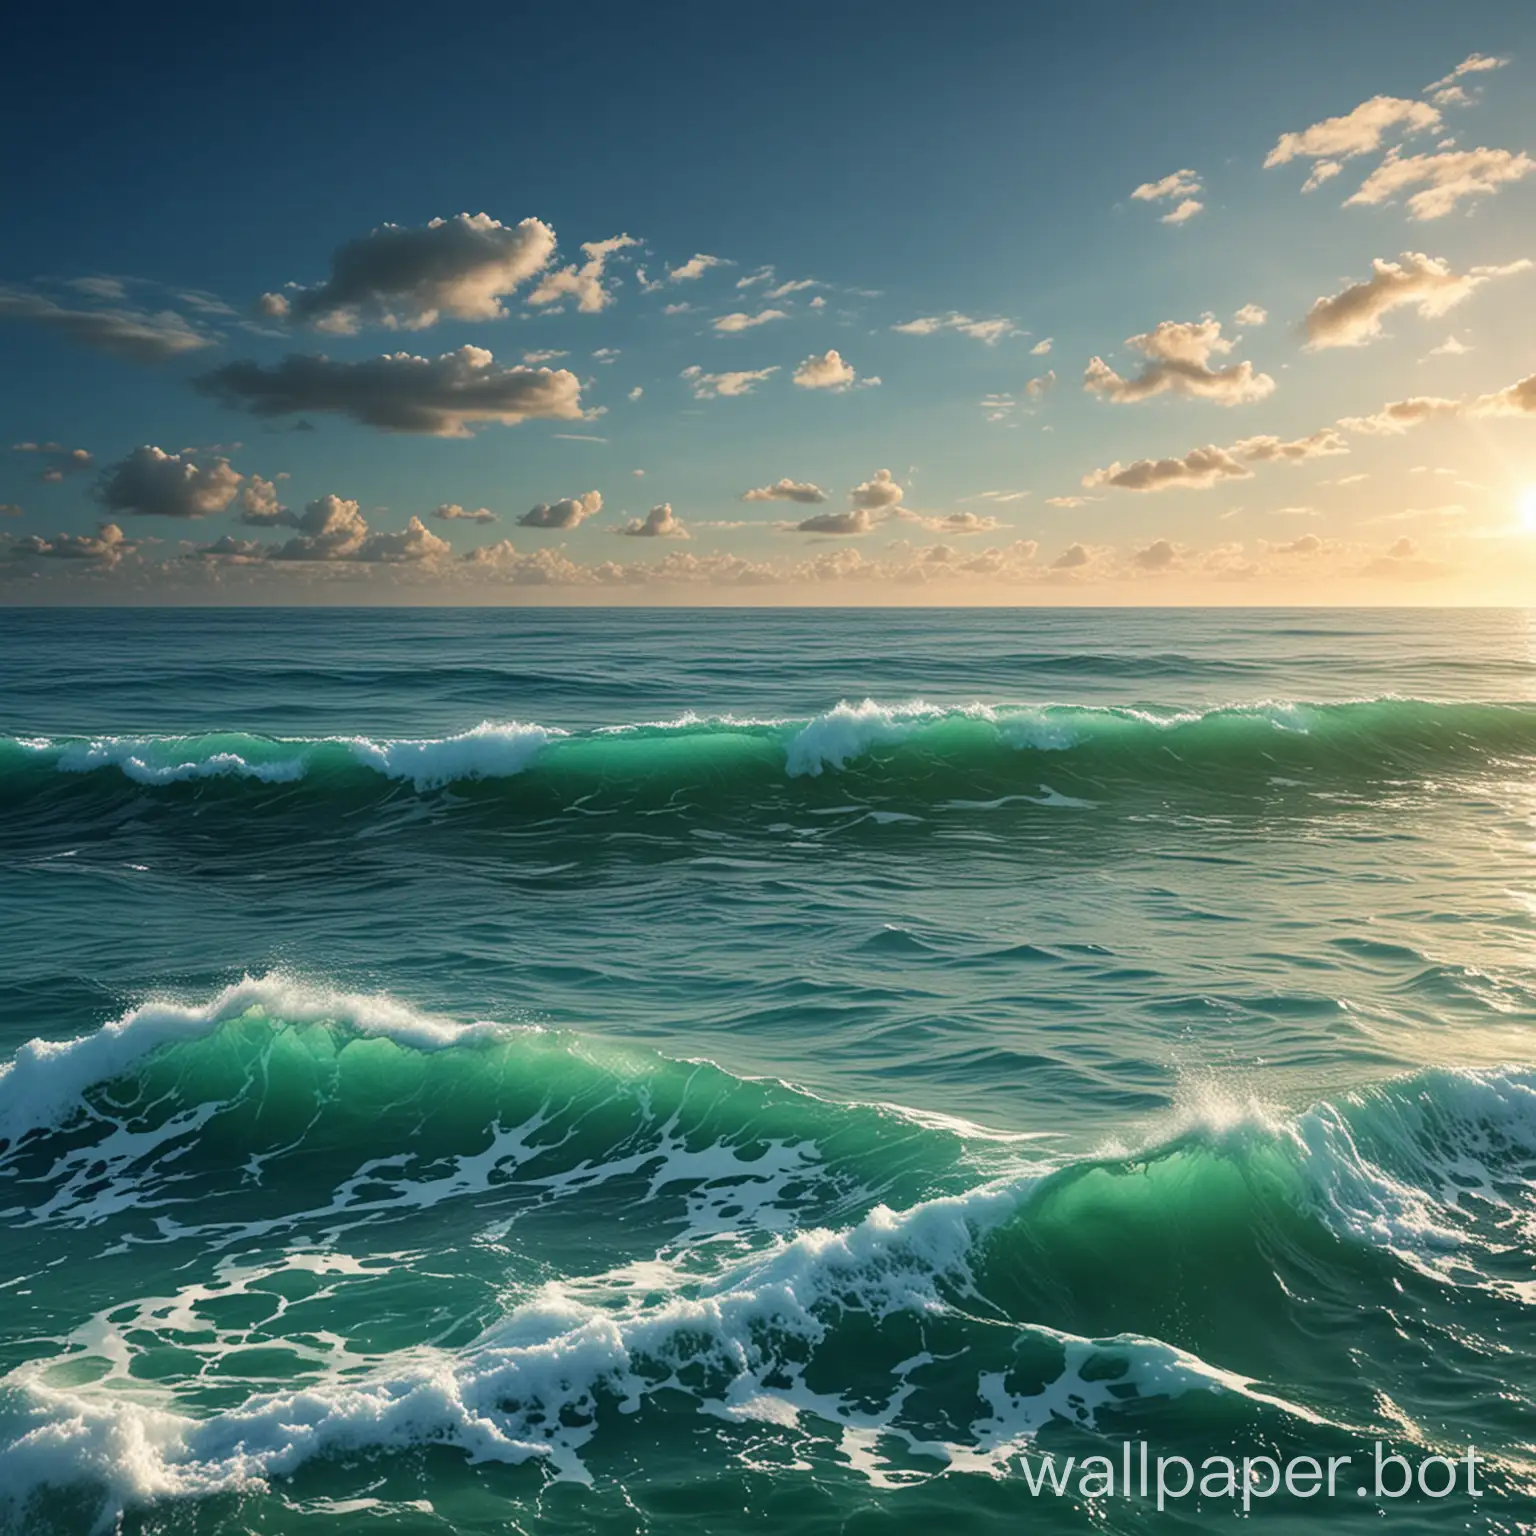 create a wallpaper from blue green ocean and feel the relief from it